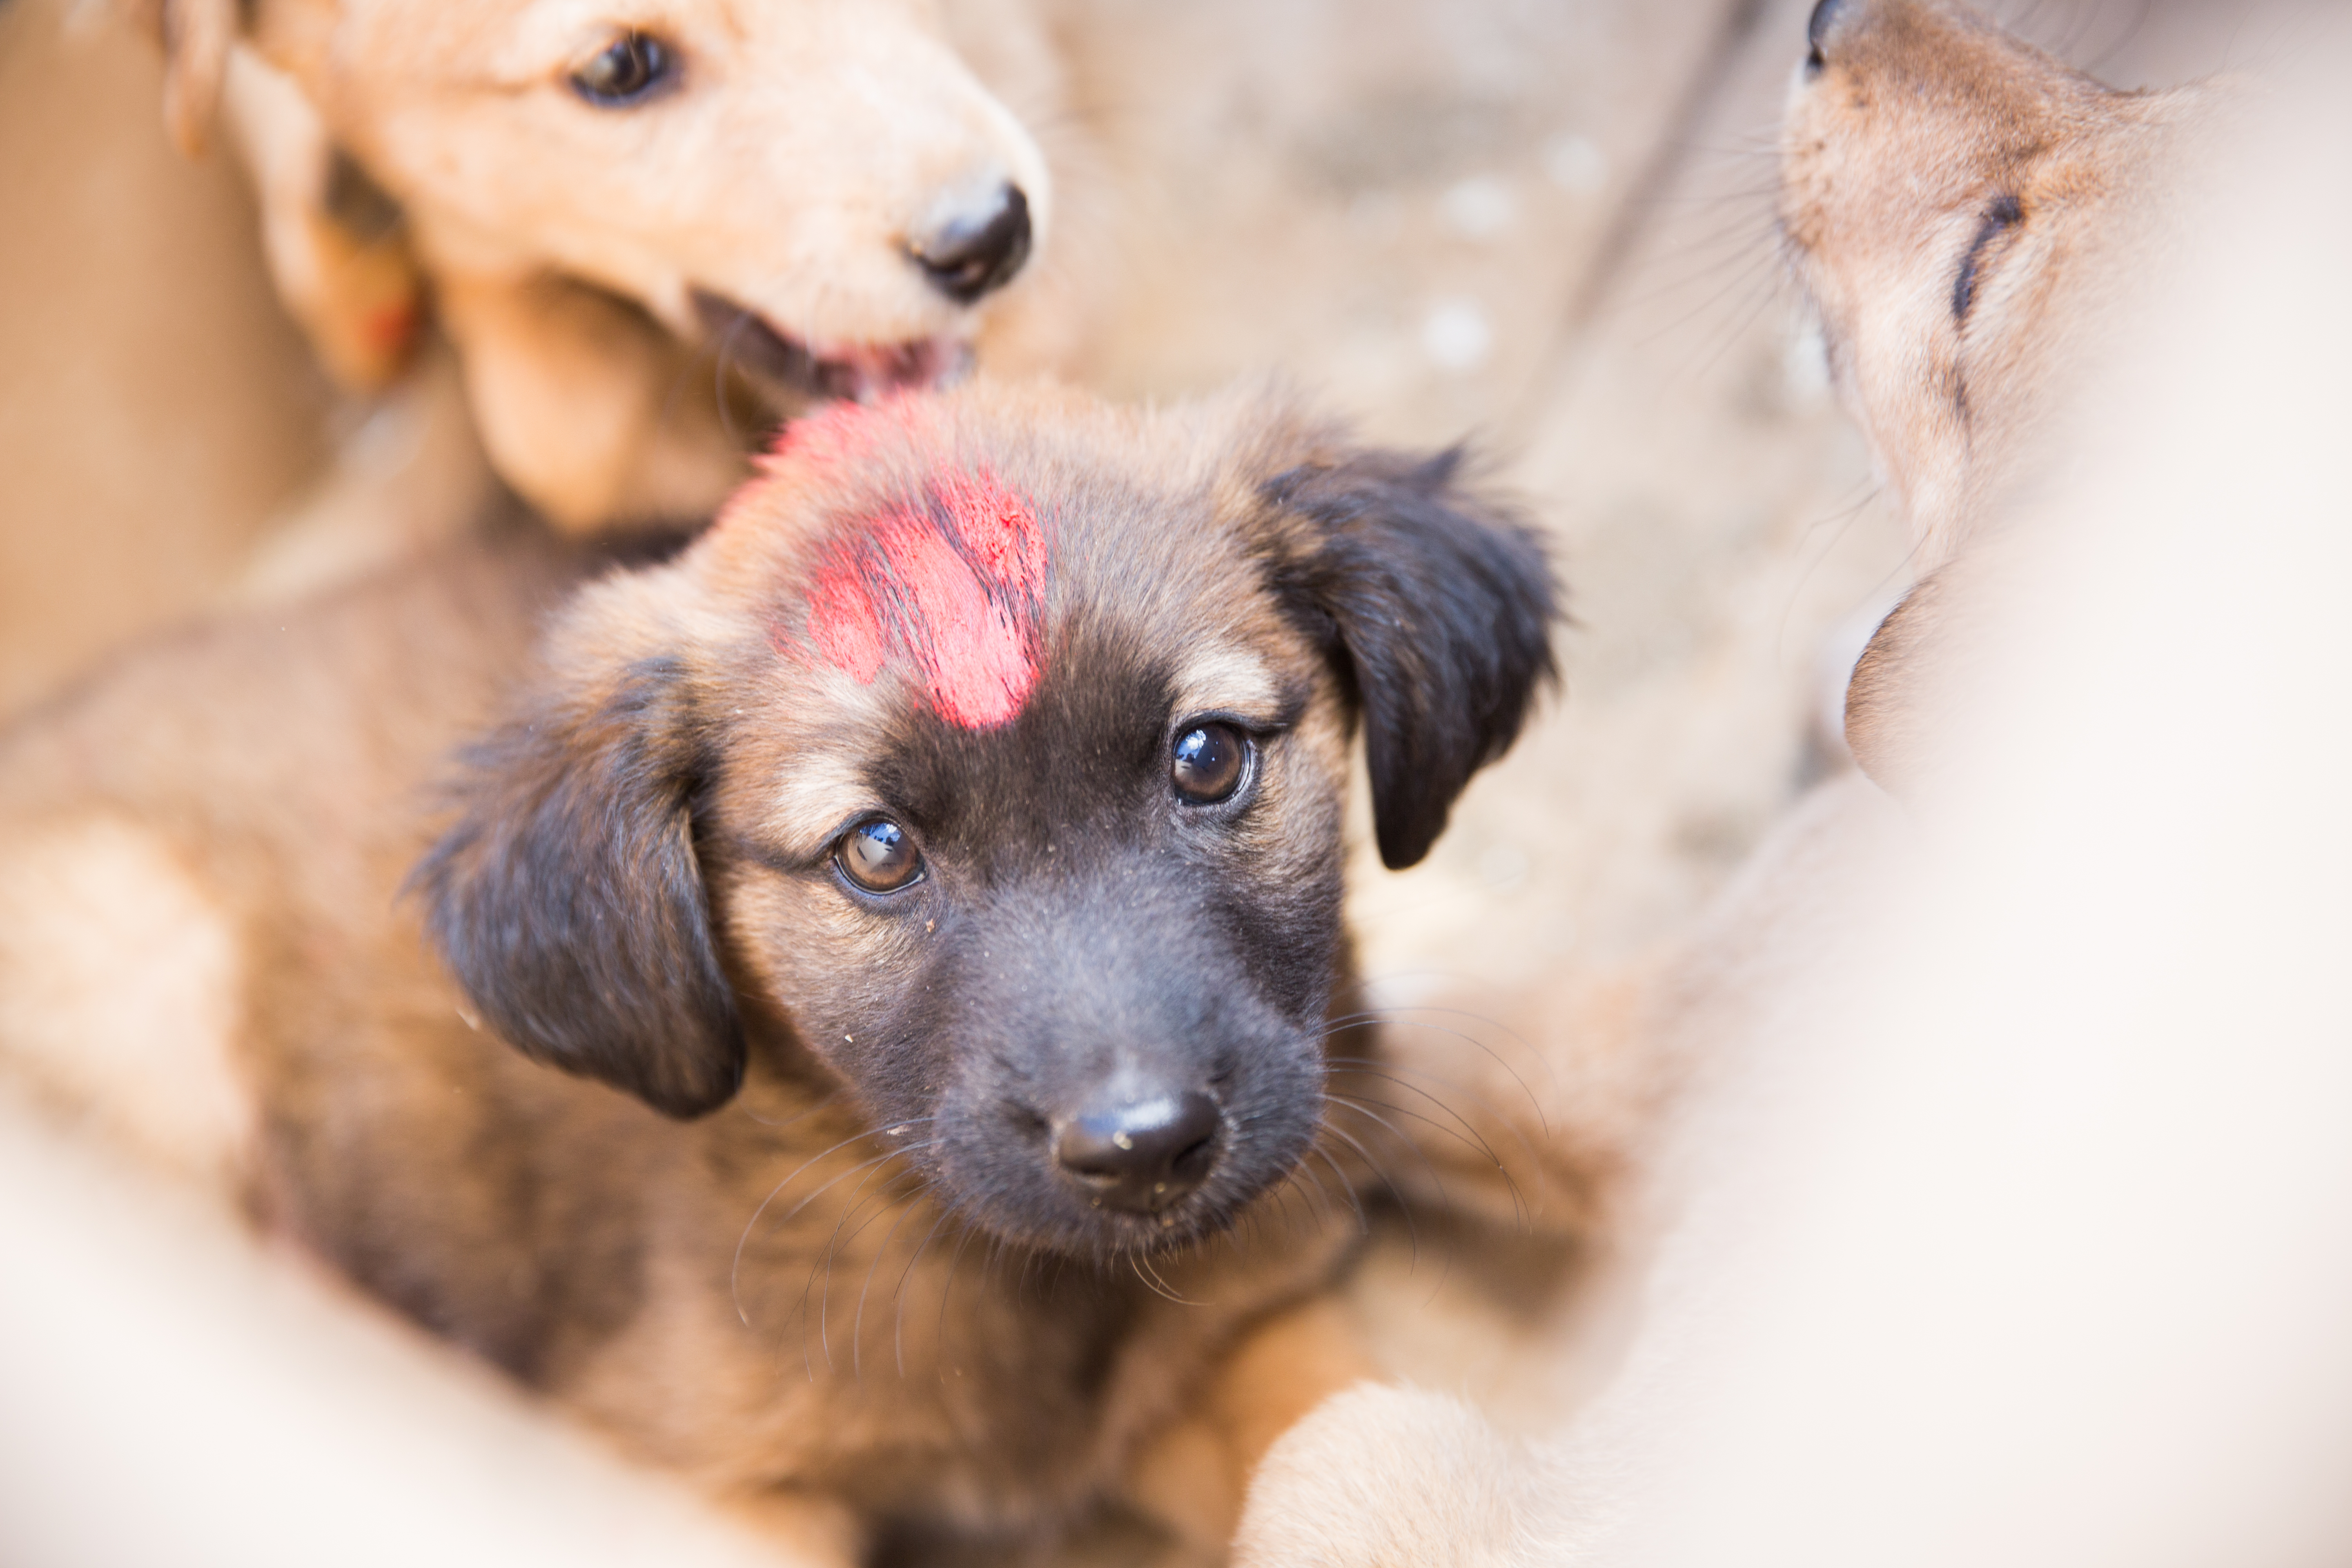 Two million dogs vaccinated against the world's deadliest disease